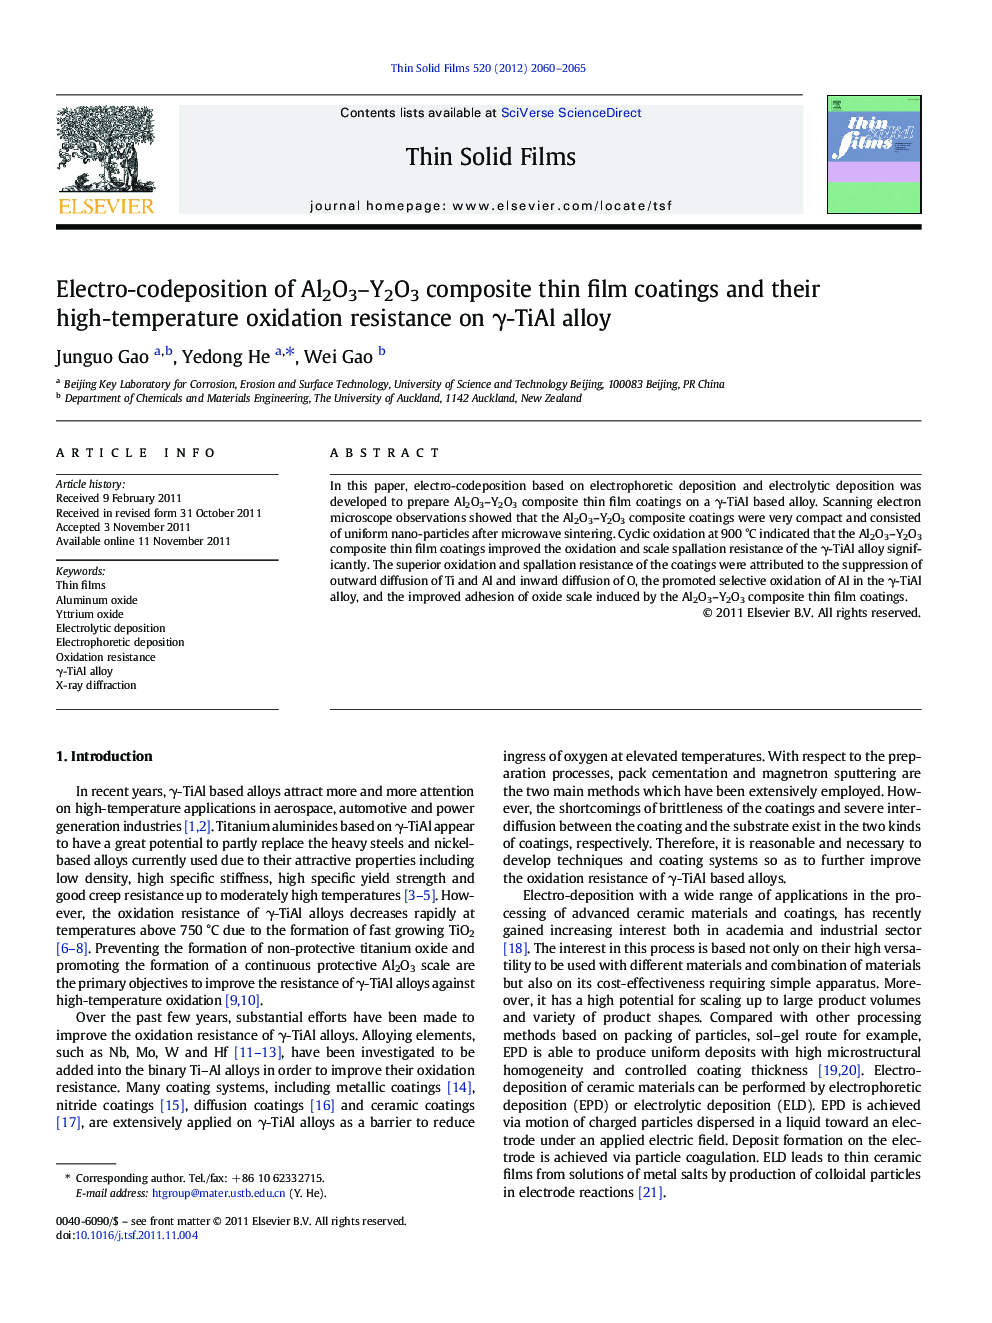 Electro-codeposition of Al2O3-Y2O3 composite thin film coatings and their high-temperature oxidation resistance on Î³-TiAl alloy